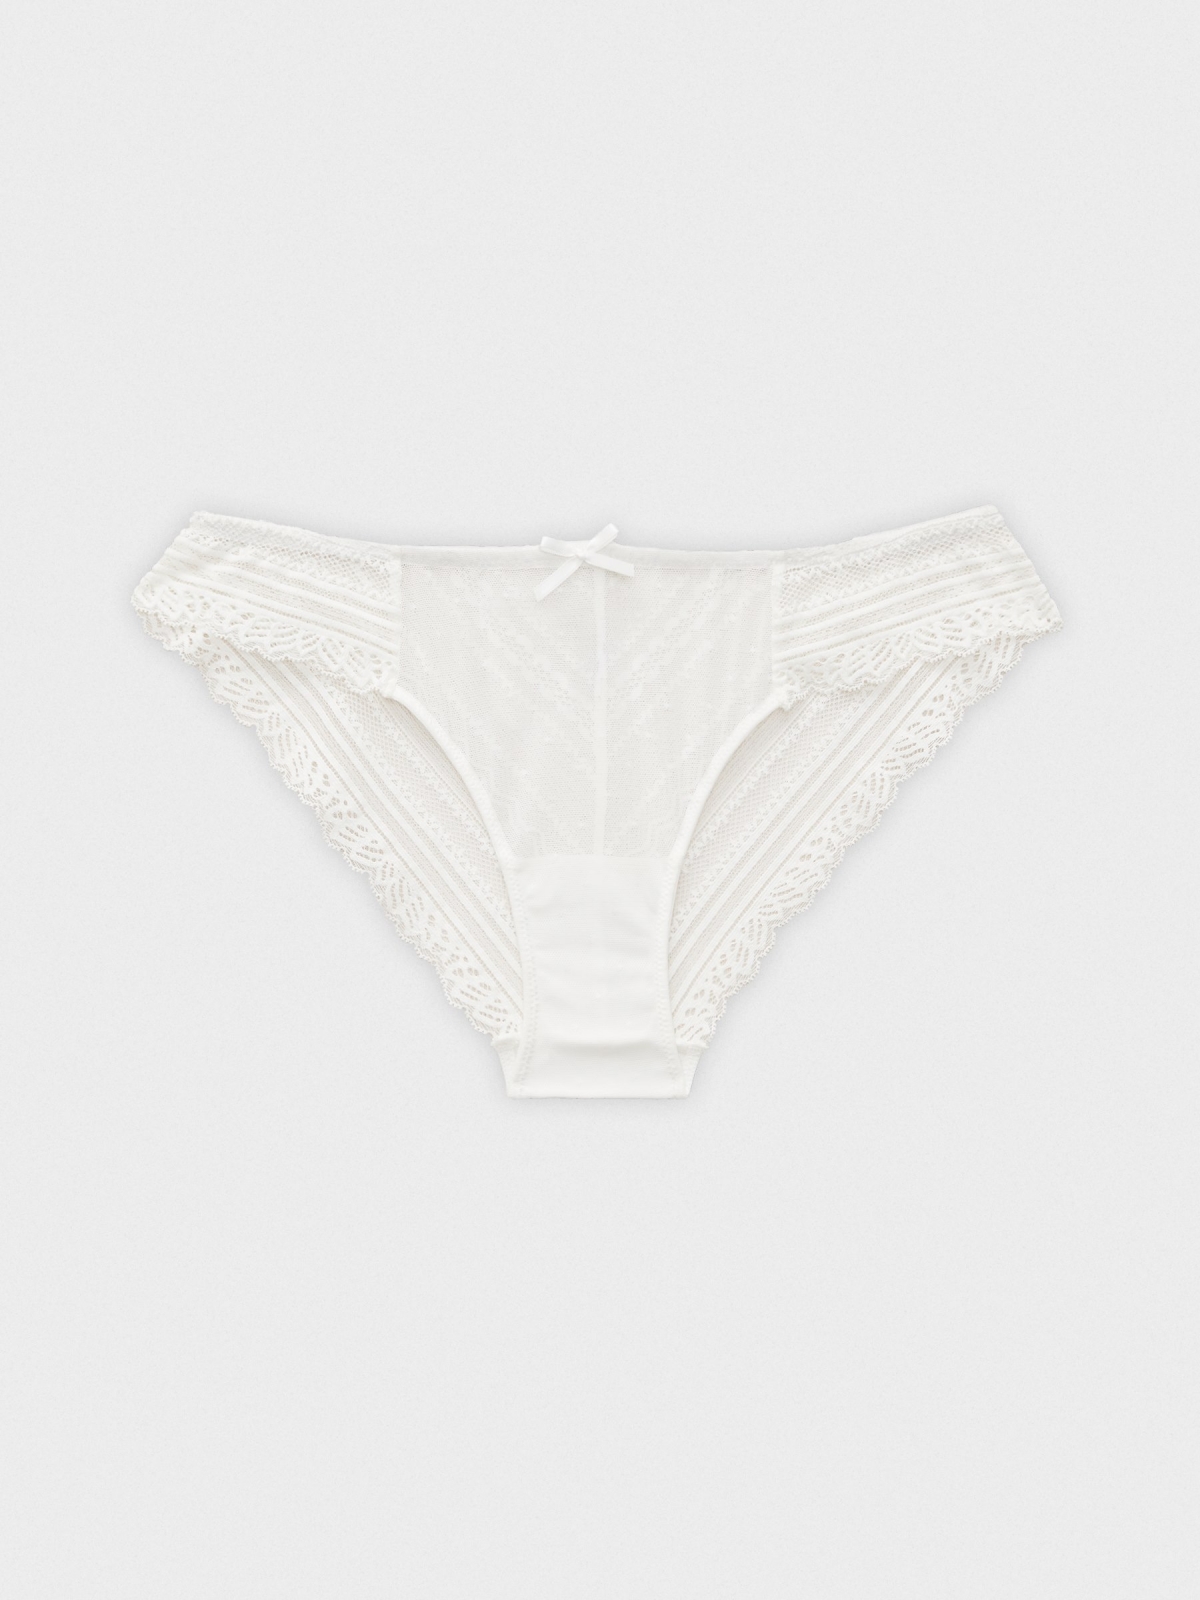 Classic white lace panties white